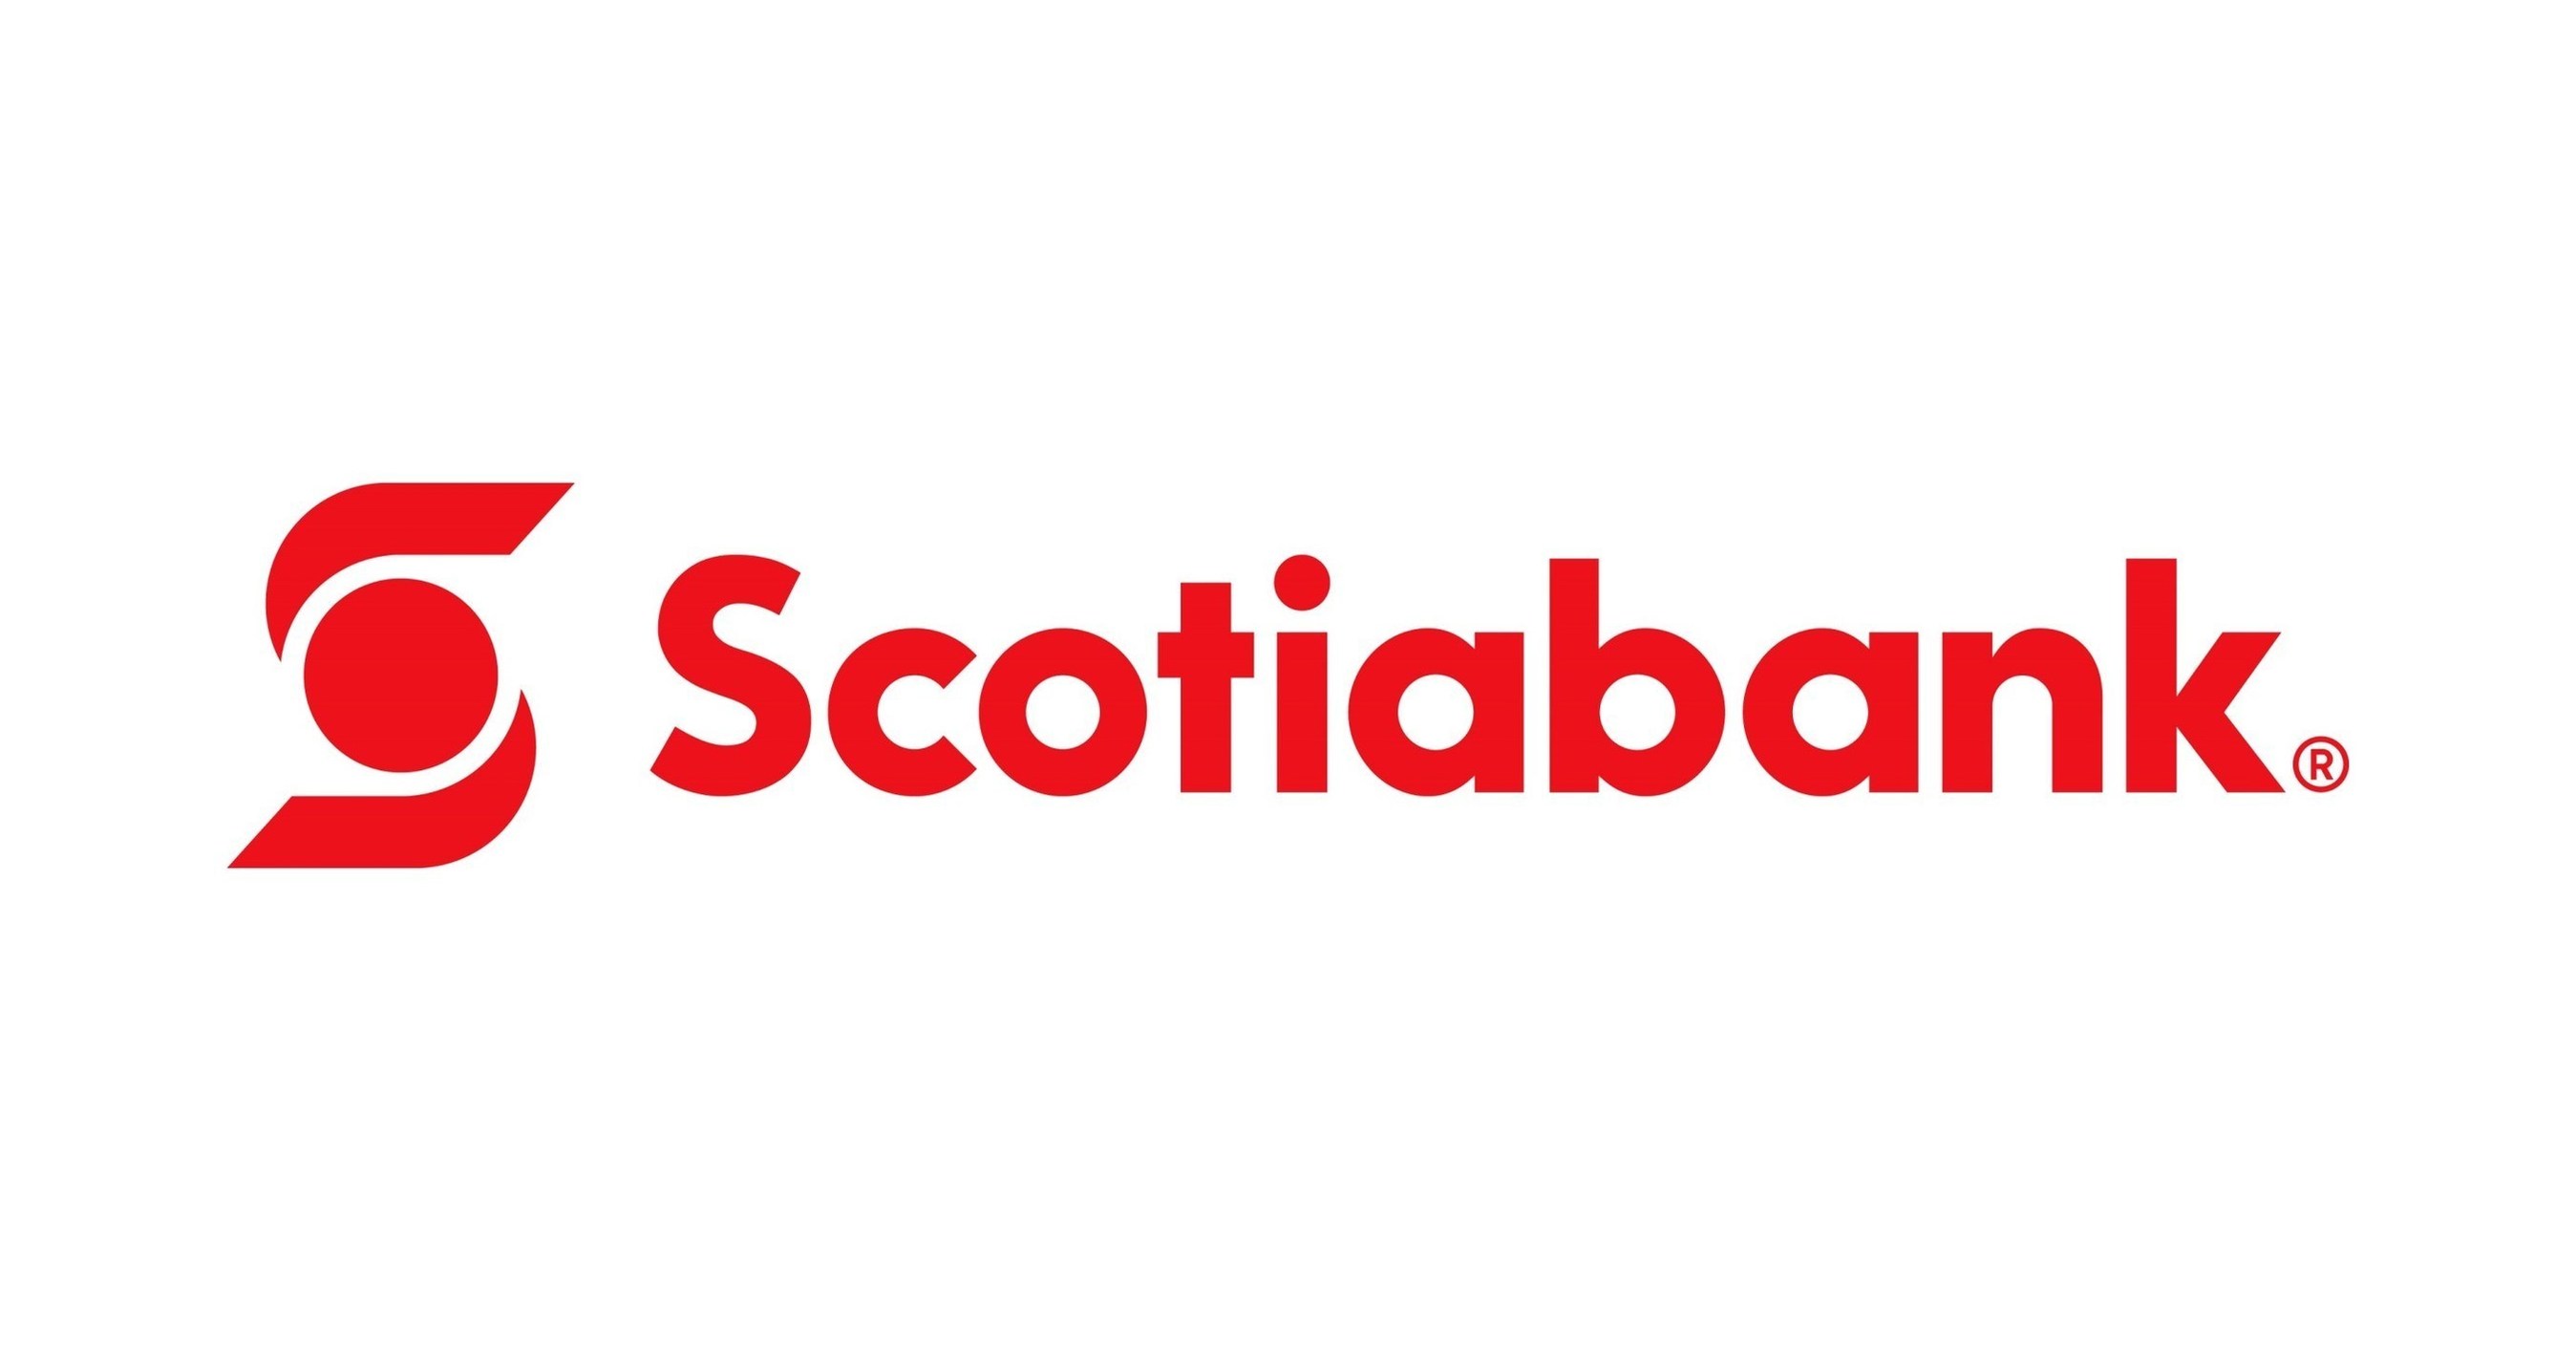 Scotiabank delivers Ultimate value and rewards with the introduction of new banking packages